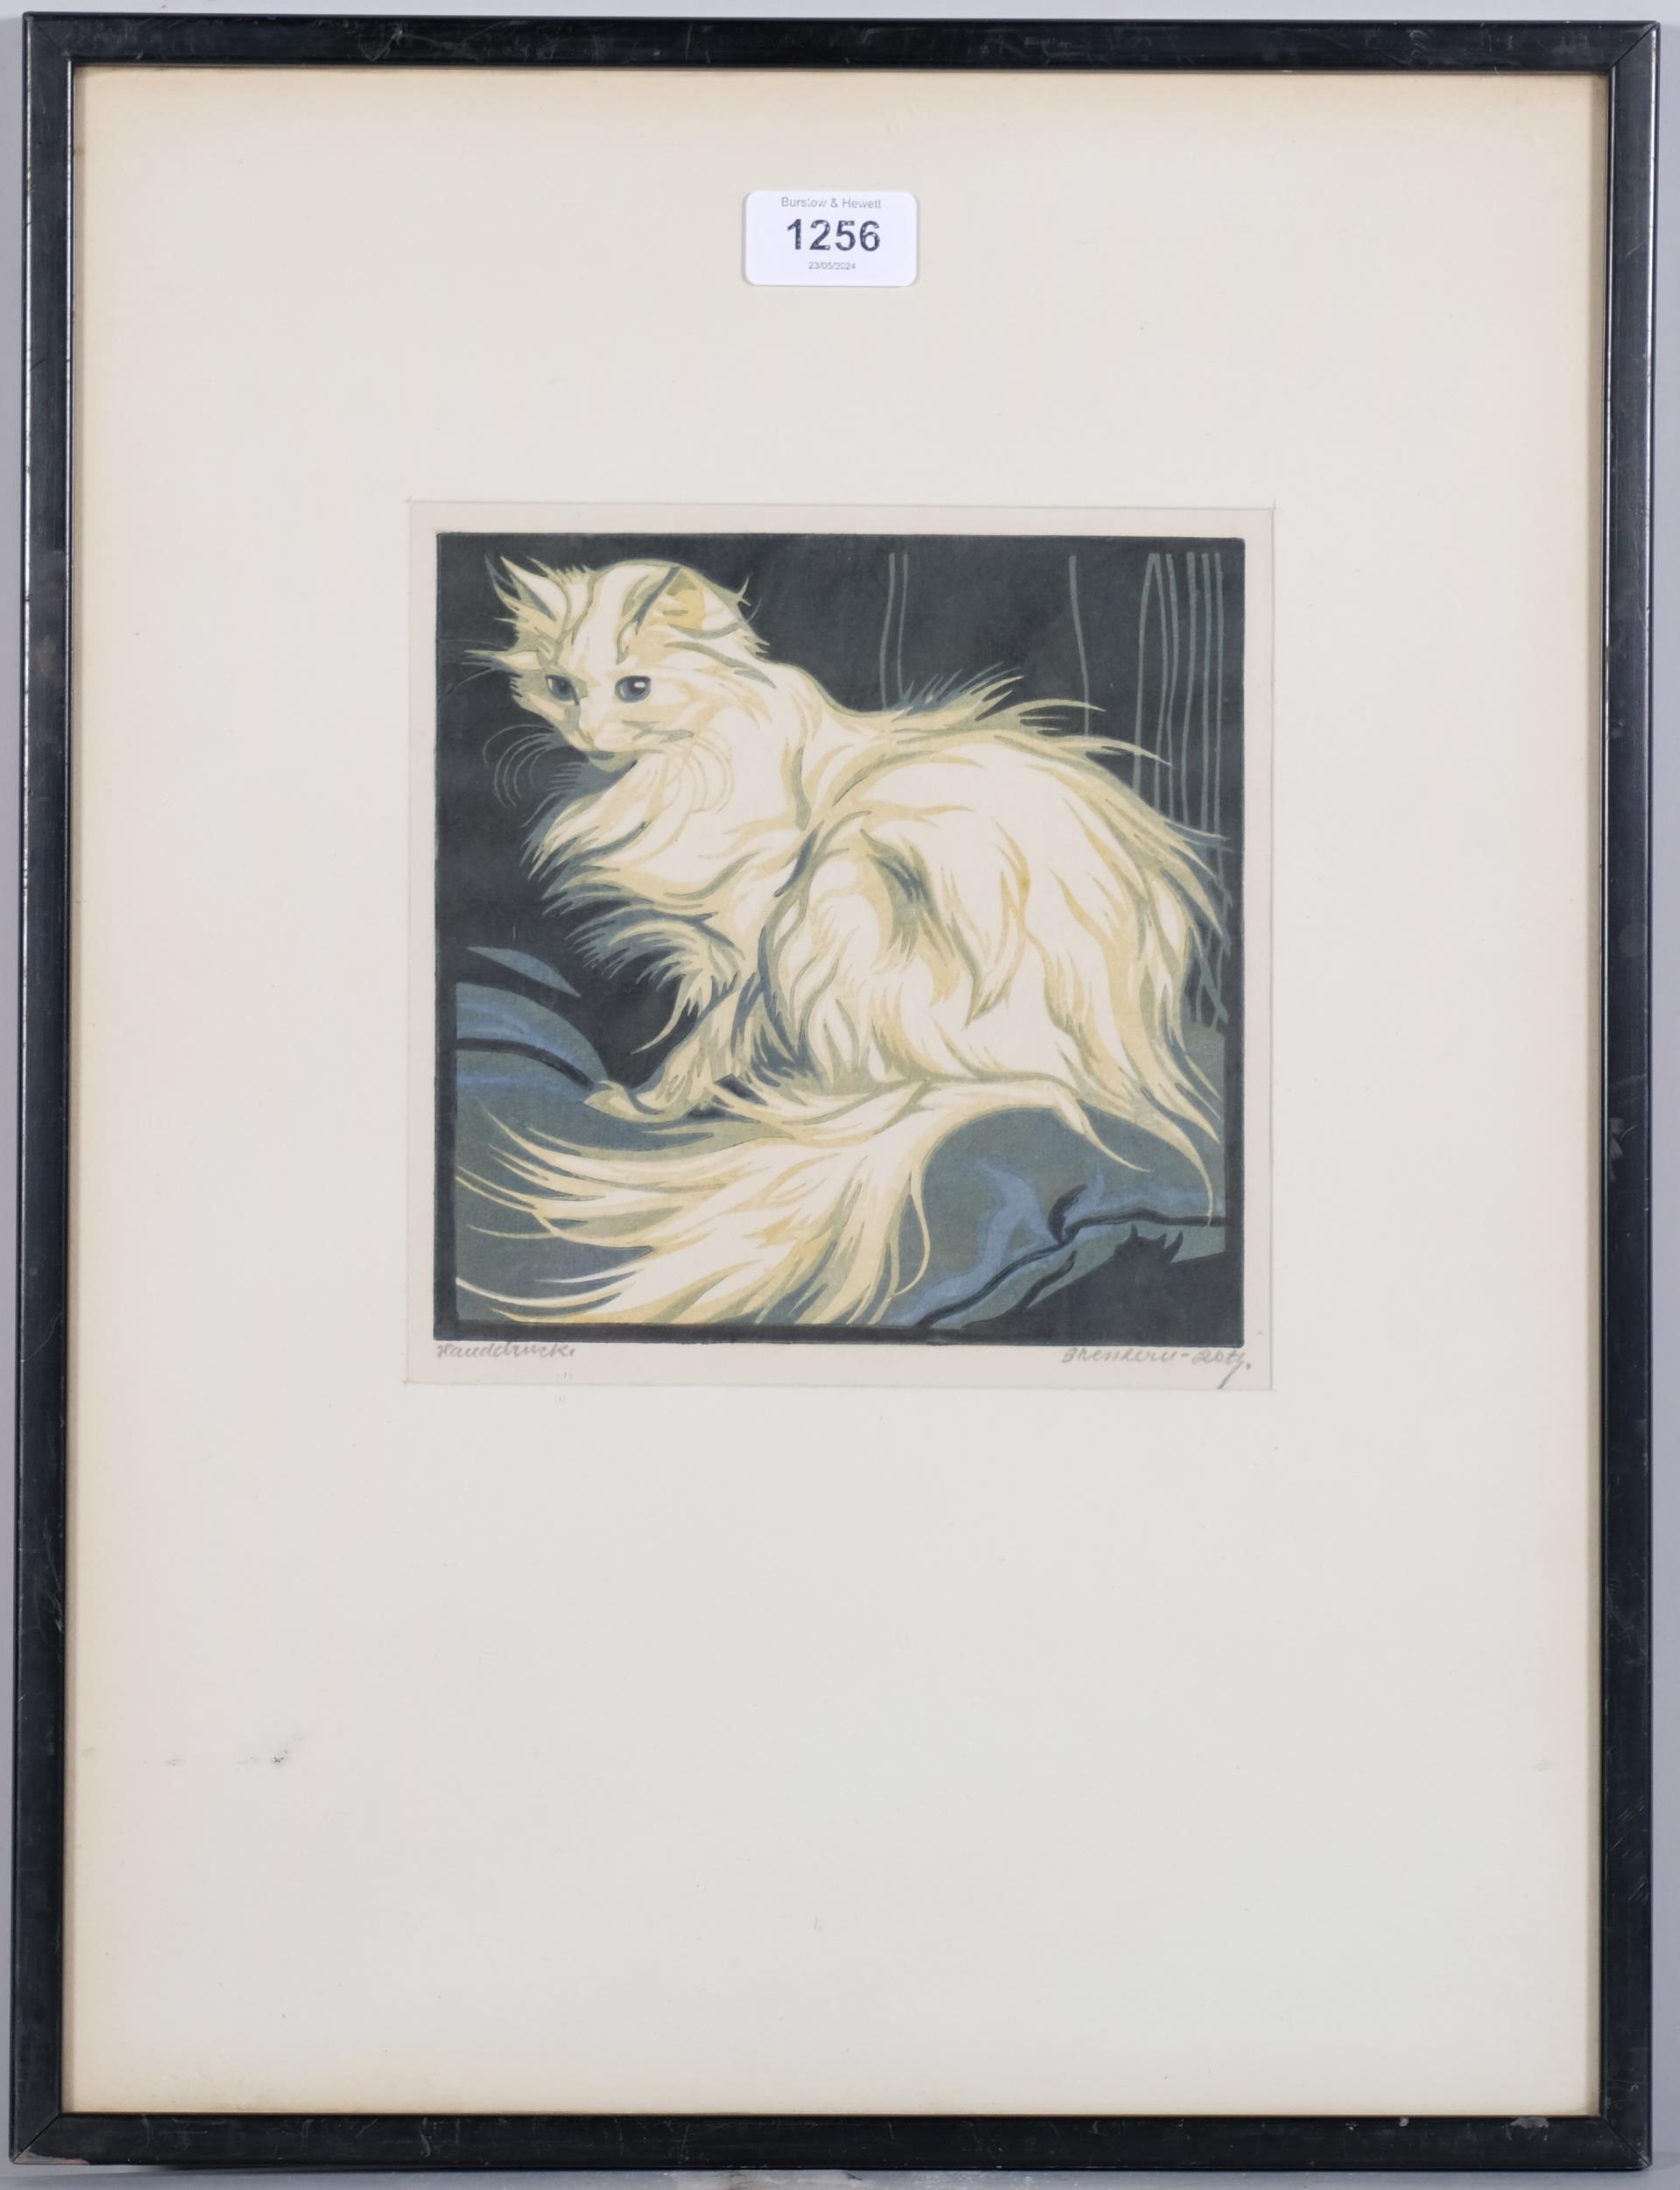 Norbertine Von Bresslern-Roth (1891 - 1978), long haired cat, colour linocut print, signed in - Image 2 of 4